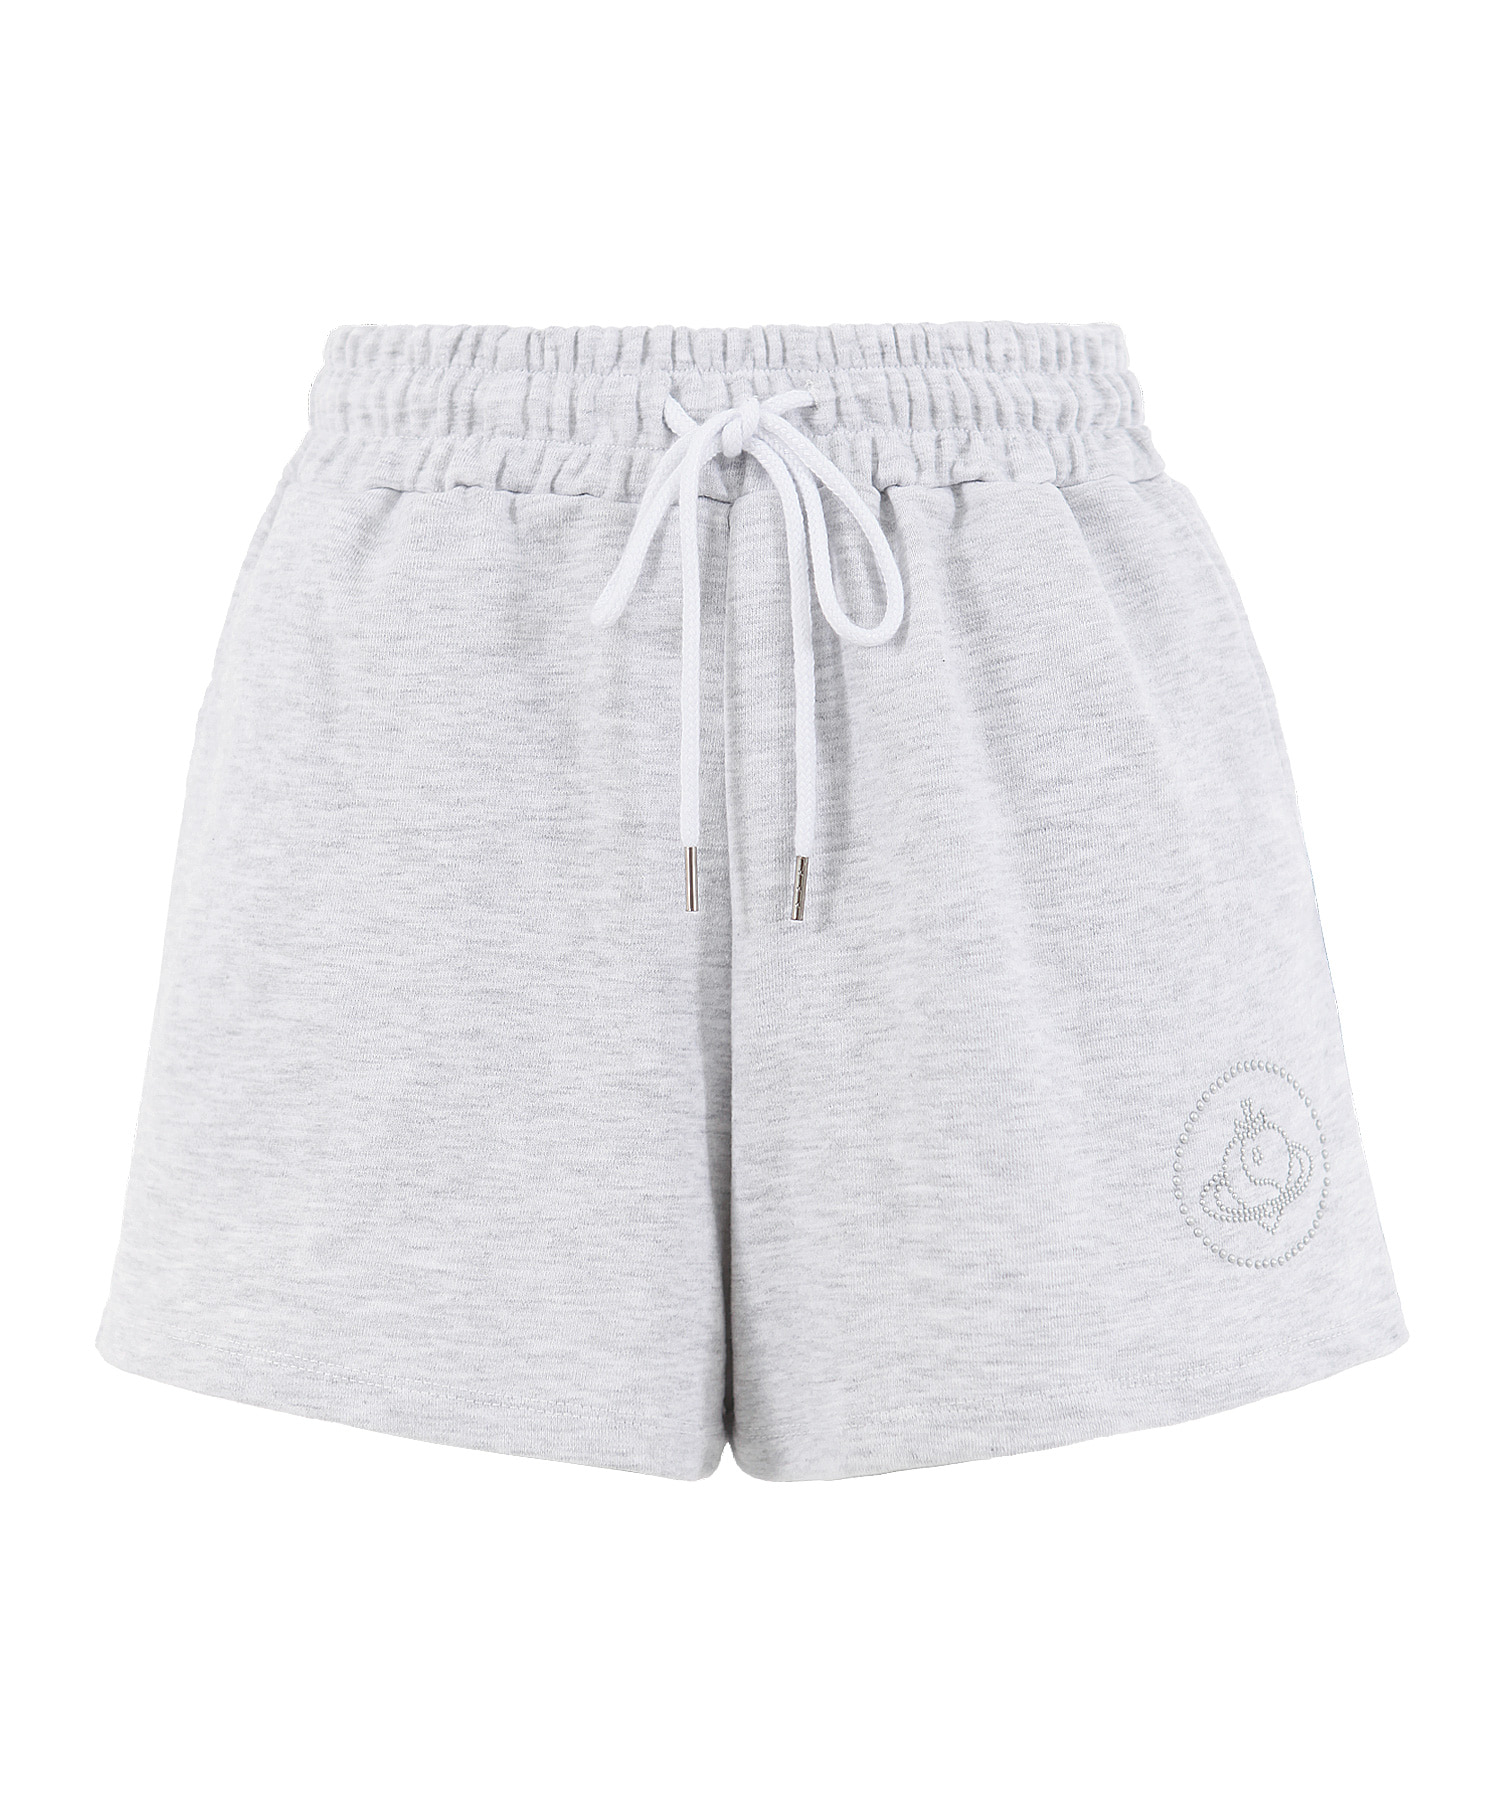 BOXER SHORTS IN GREY